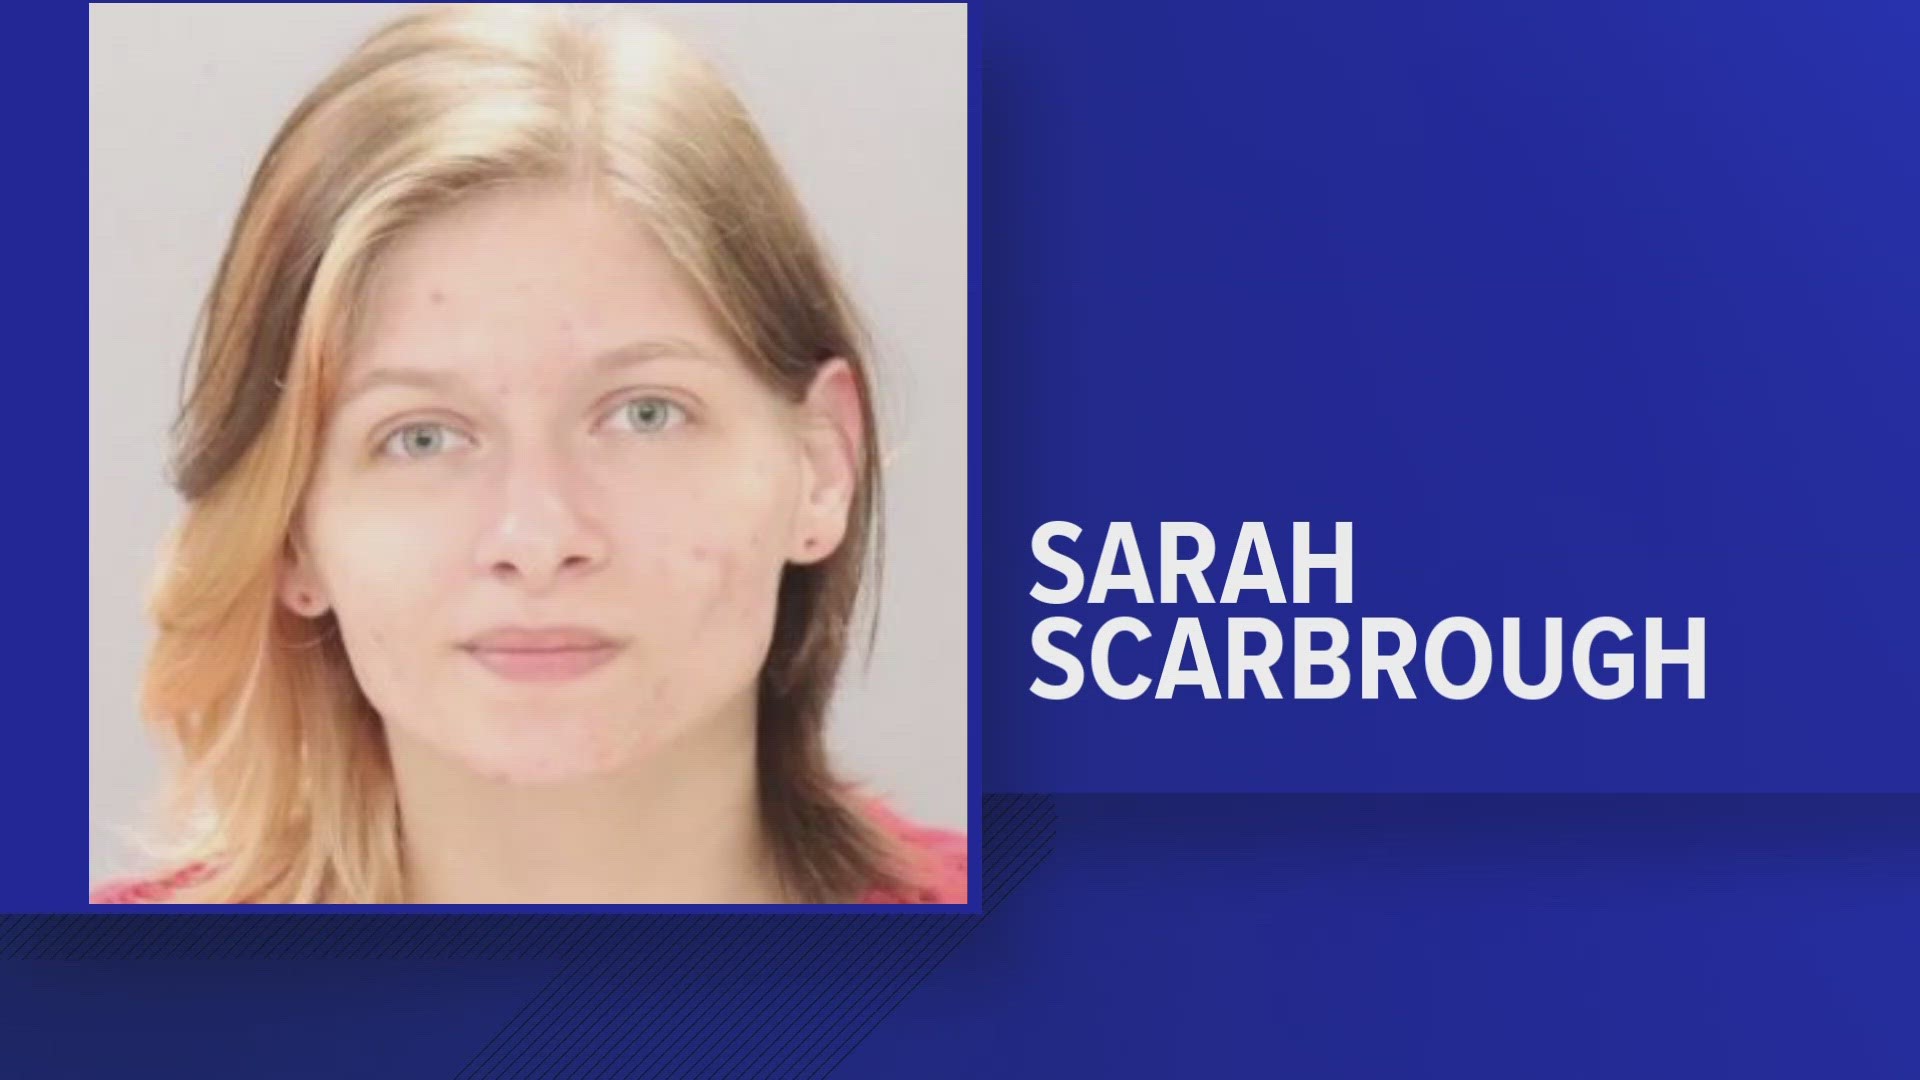 The Knoxville Police Department said Sarah Scarbrough, 22, turned herself in on May 24.